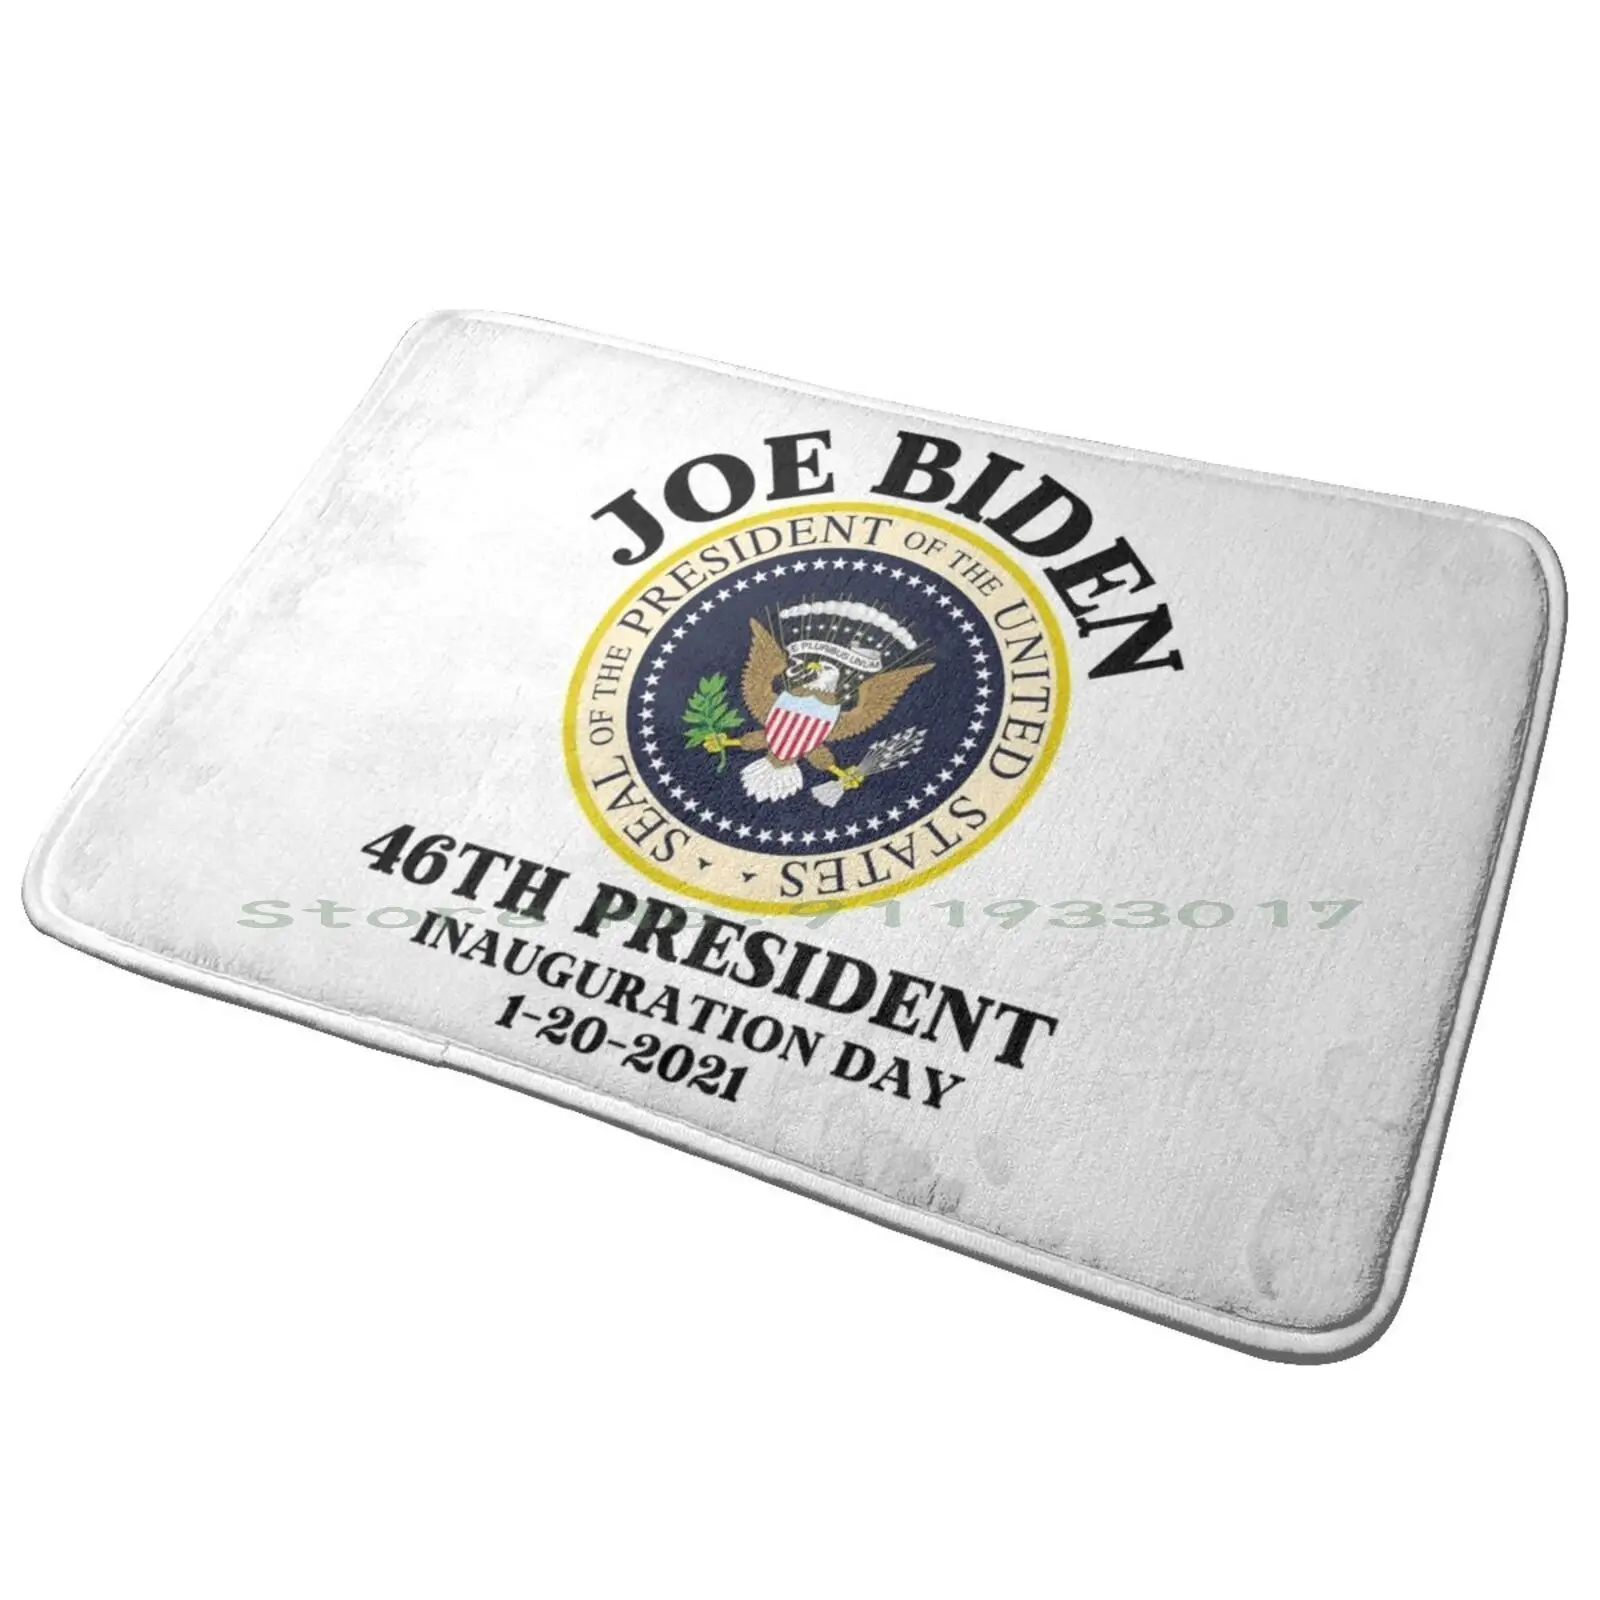 

The 46th President Of The United States Of America Usa Joe Biden Entrance Door Mat Bath Mat Rug Abstract Background Baroque